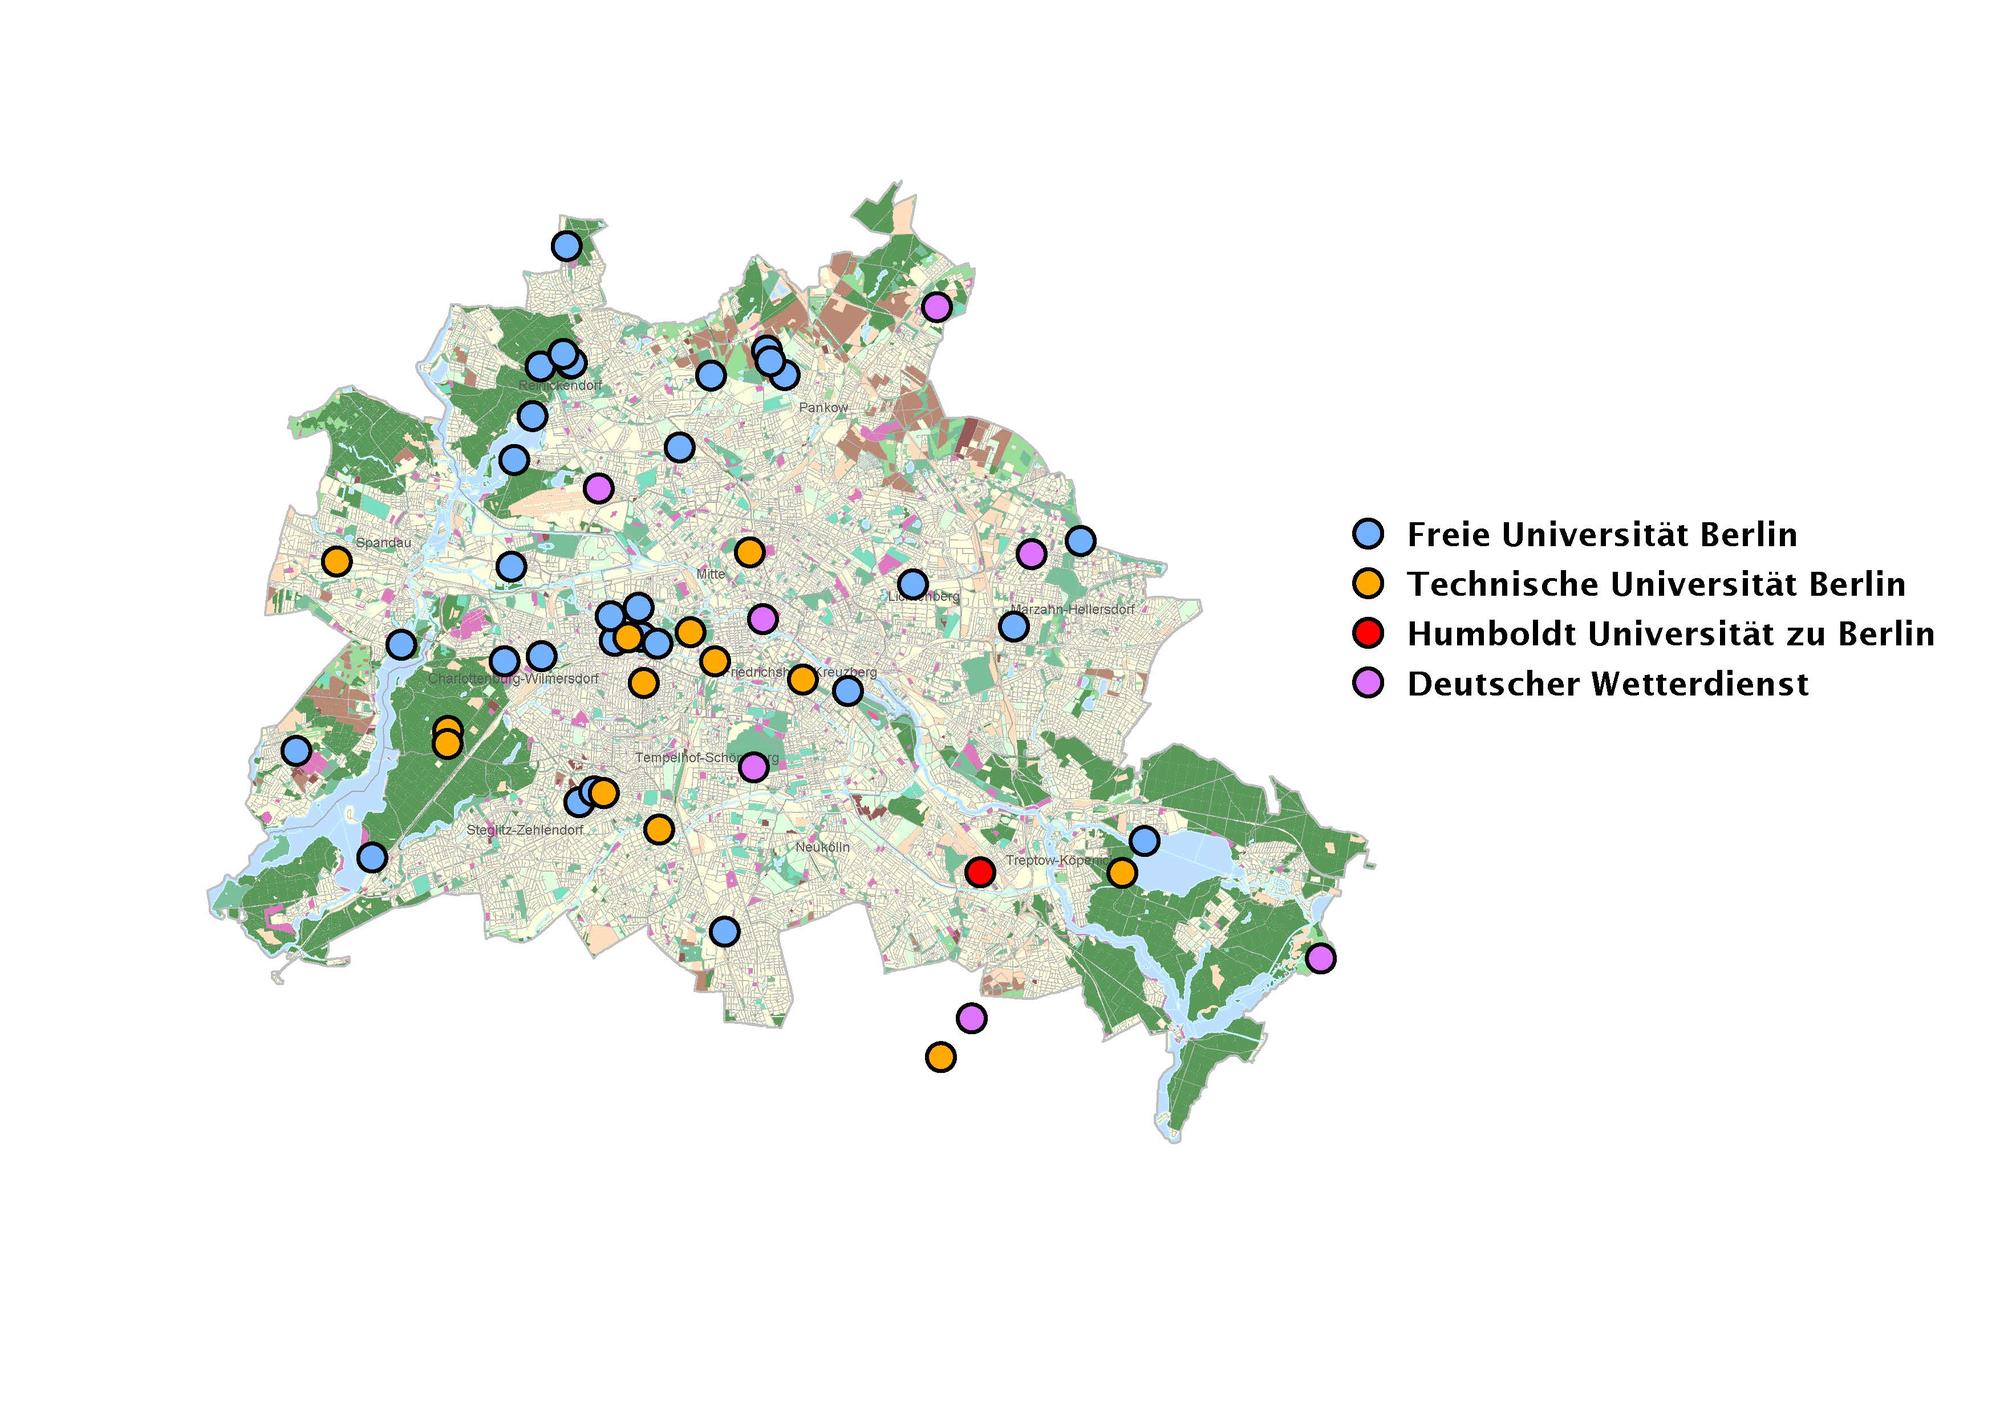 Making weather measurable: 53 monitoring stations are located across Berlin.